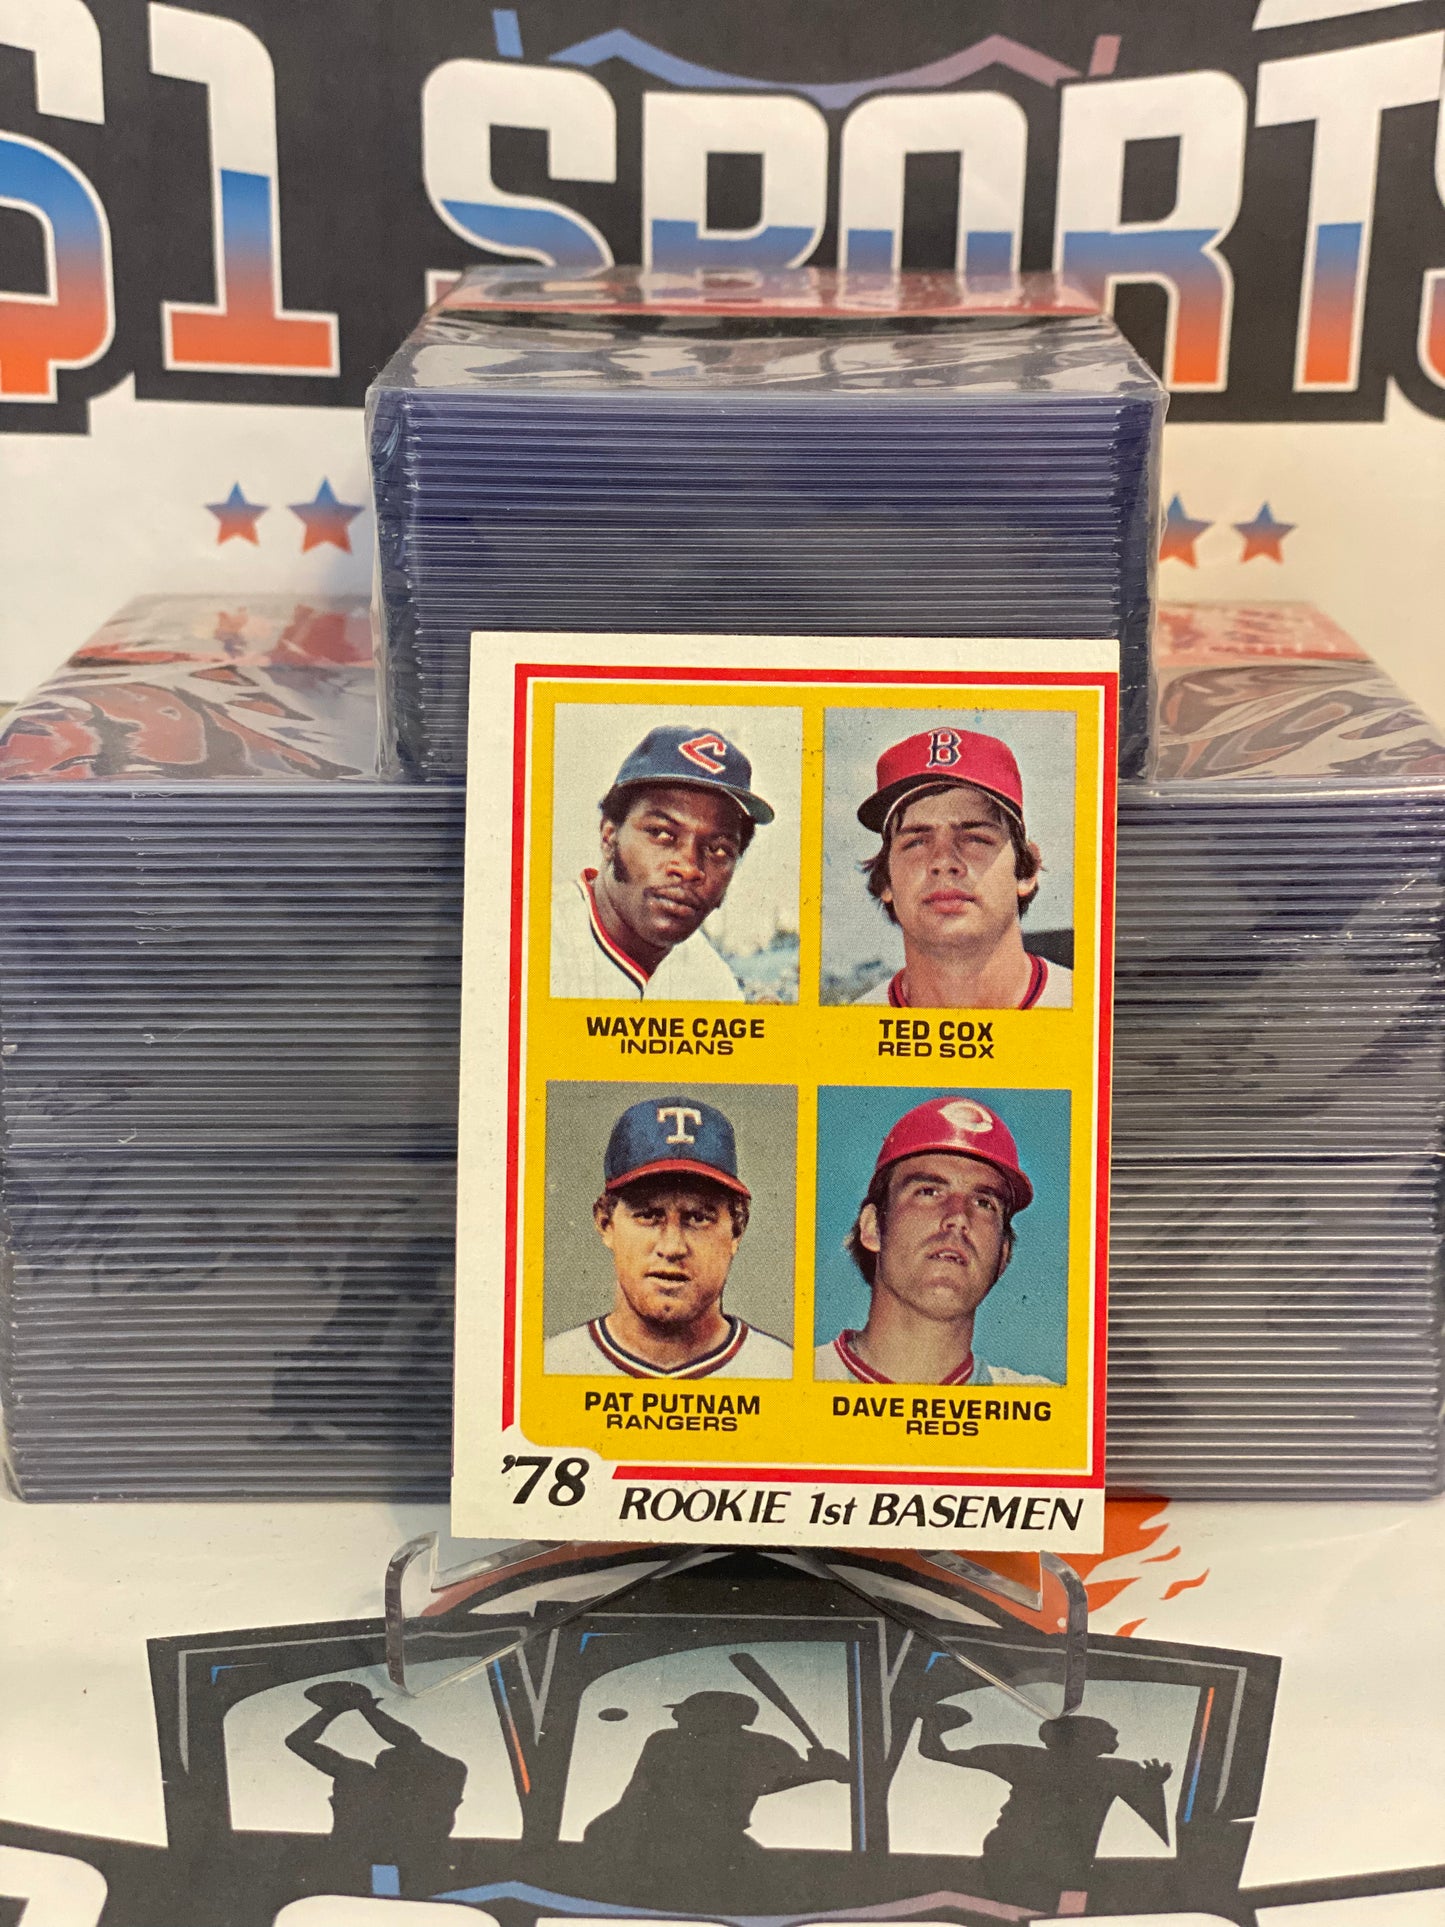 1978 Topps (Rookie First Basemen) Wage Cage, Ted Cox, Pat Putnam, Dave Revering #706